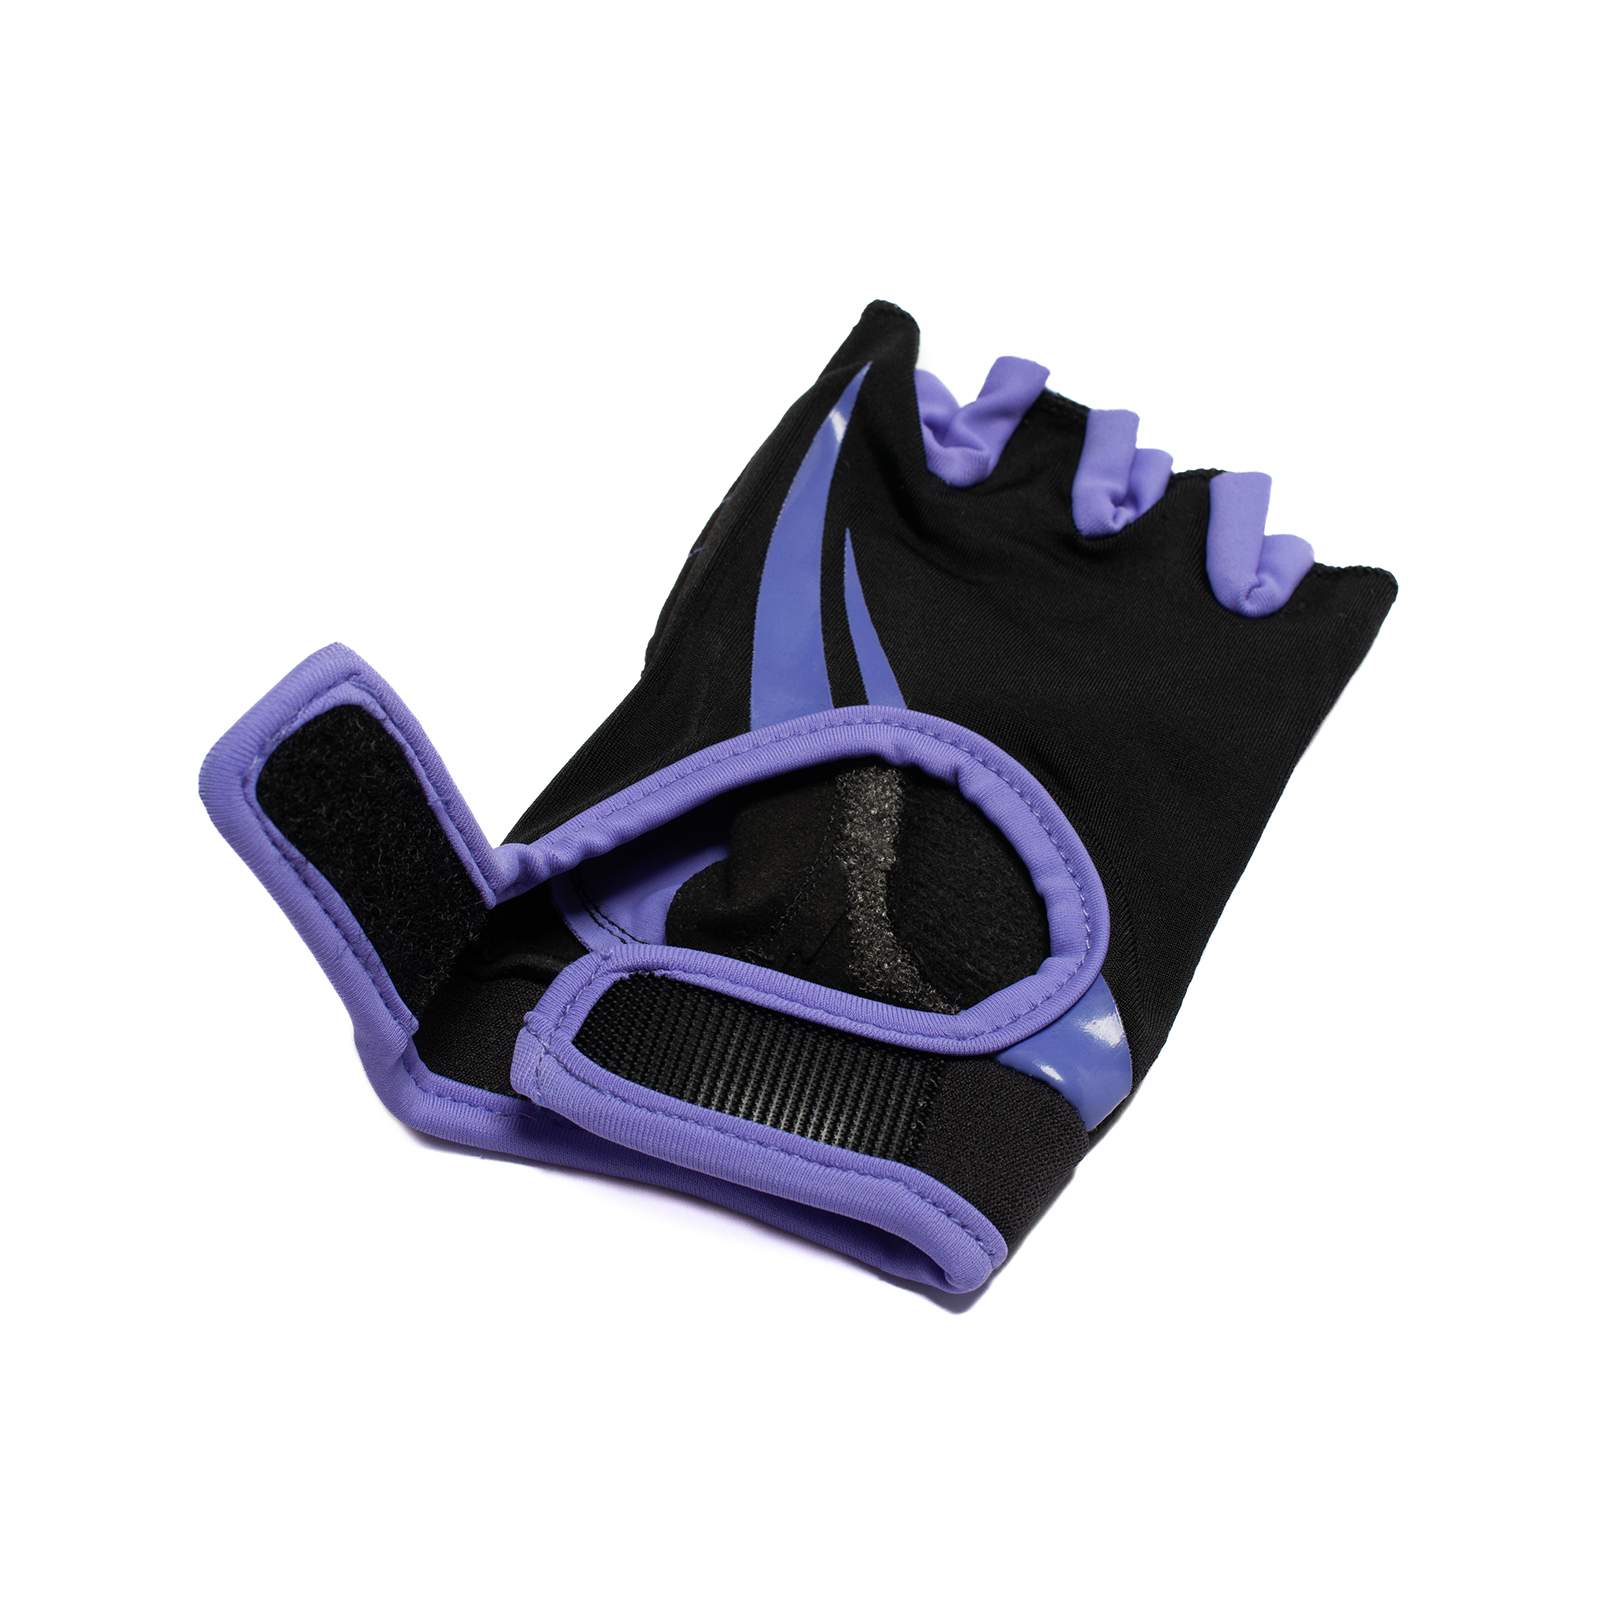 GripGuard Running Gloves: Your faithful running companions with a reliable grip and warm protection!